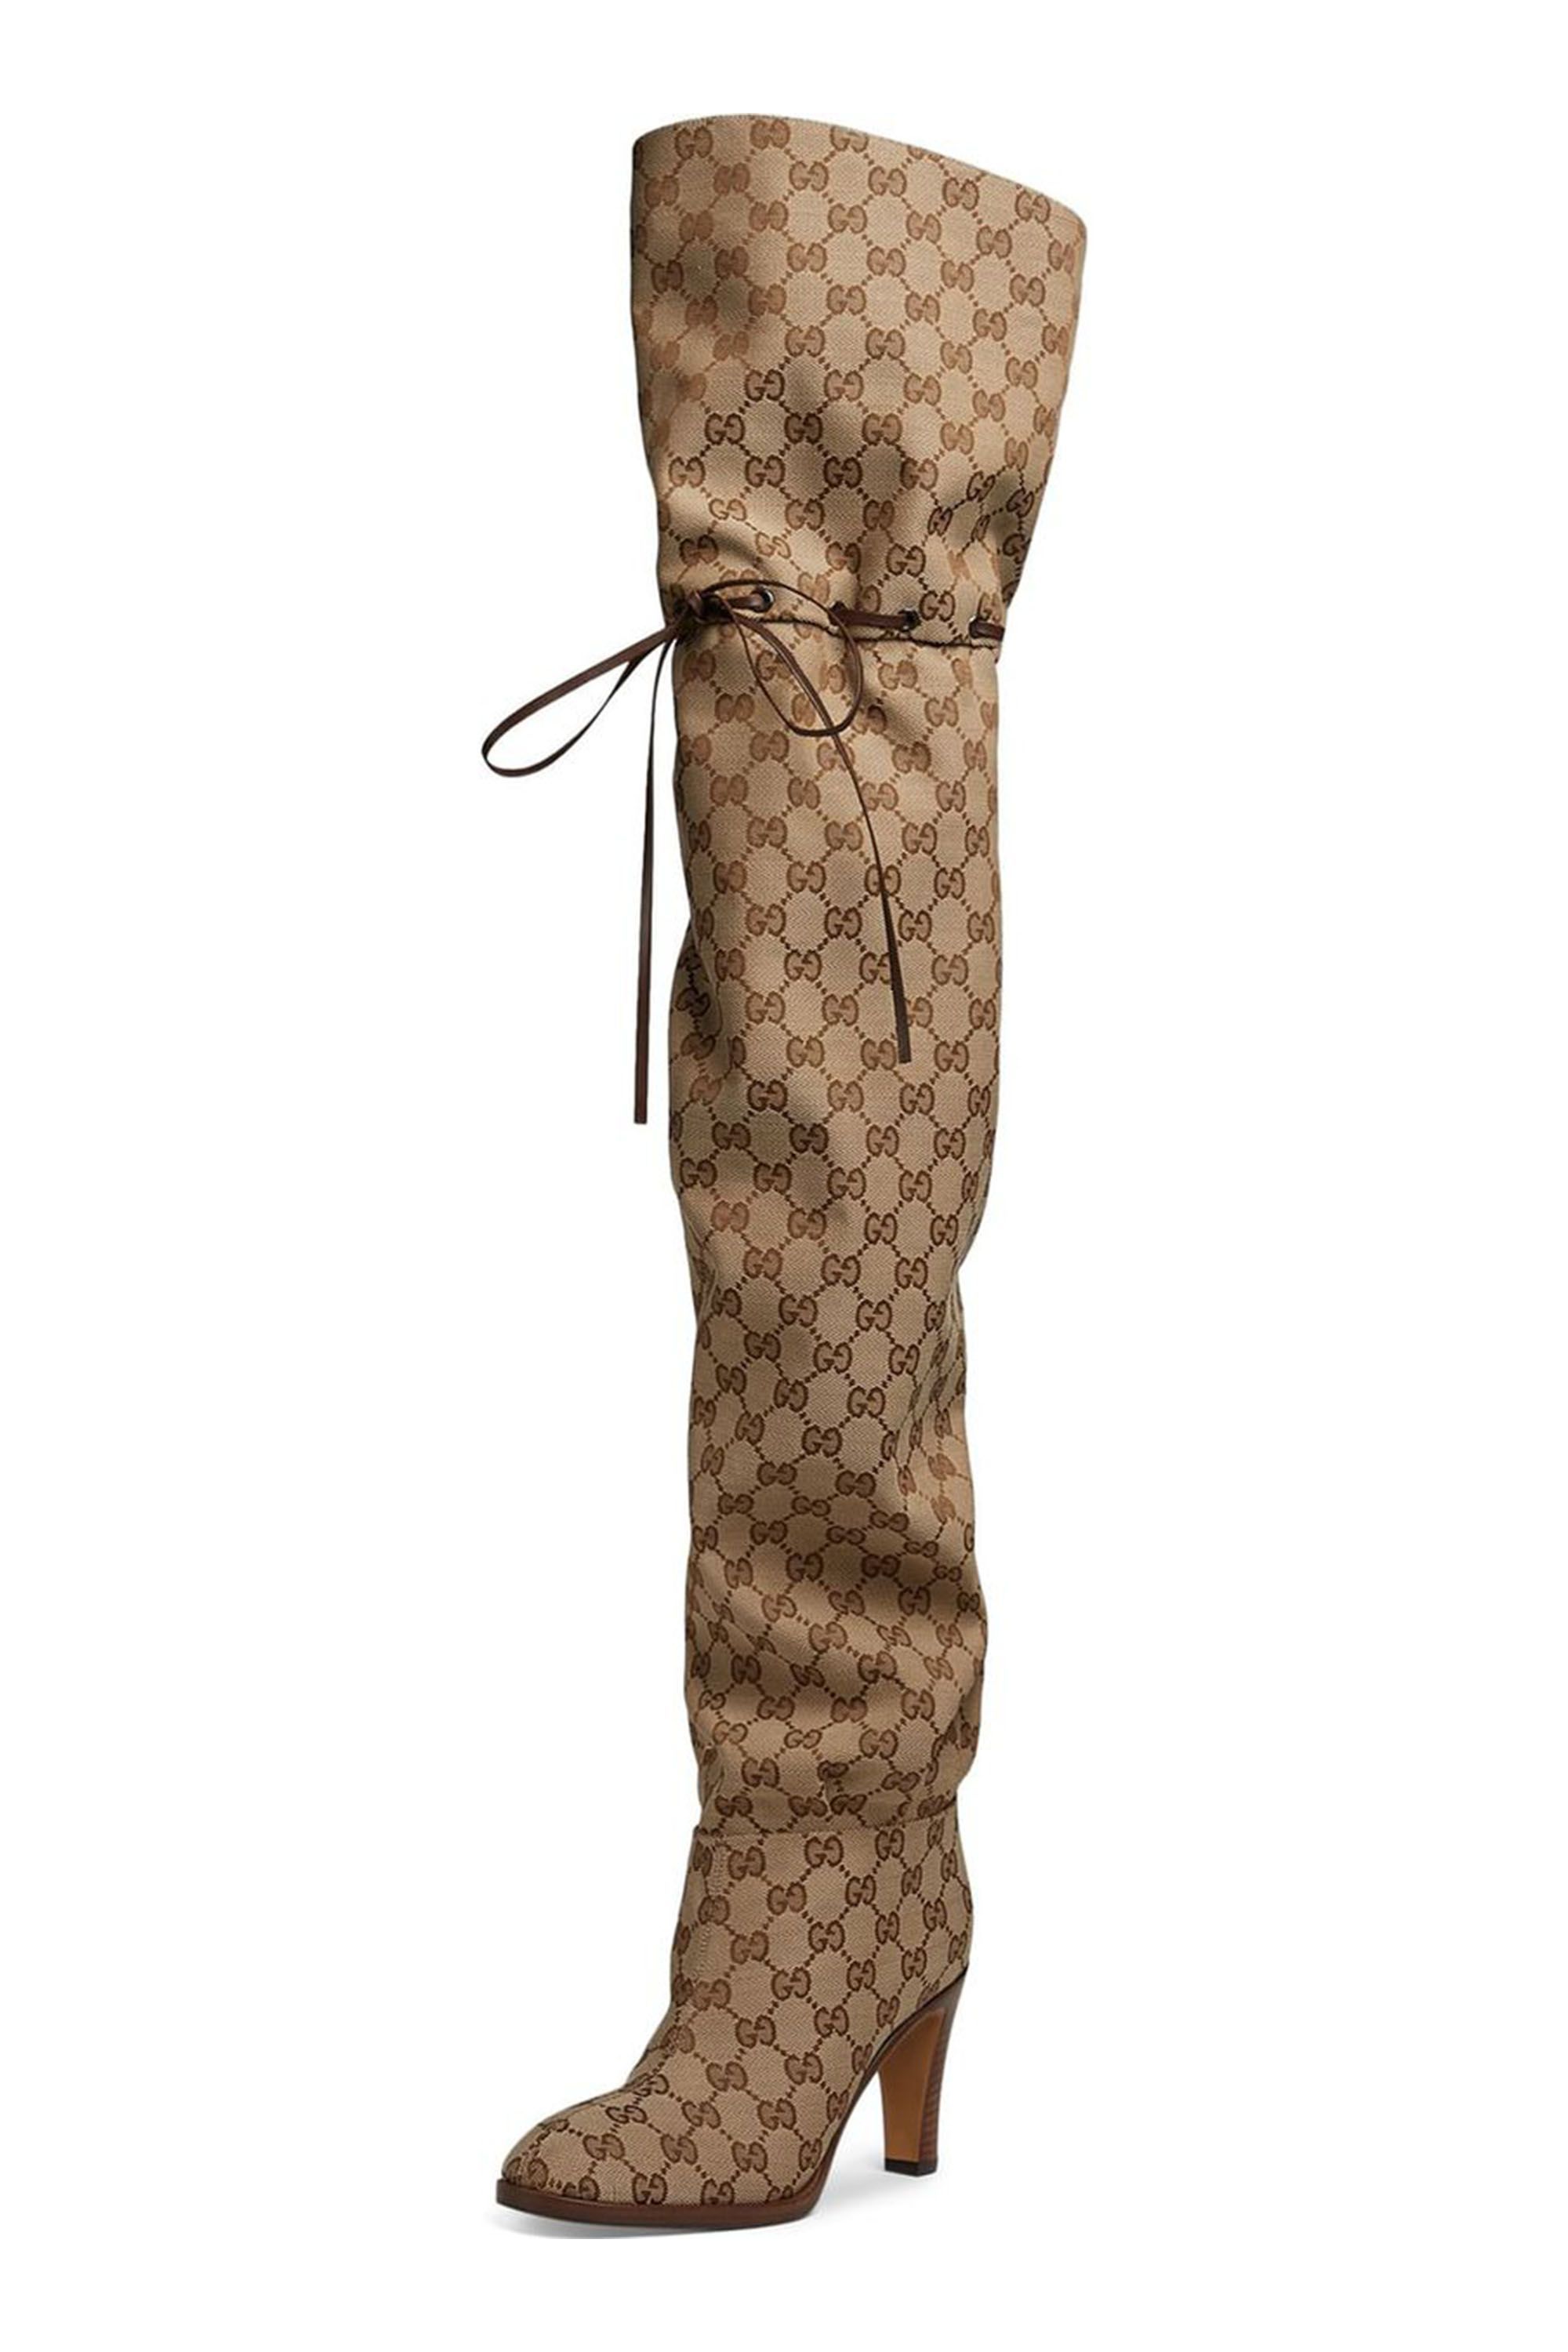 Gucci Original GG Canvas Over the Knee Boot